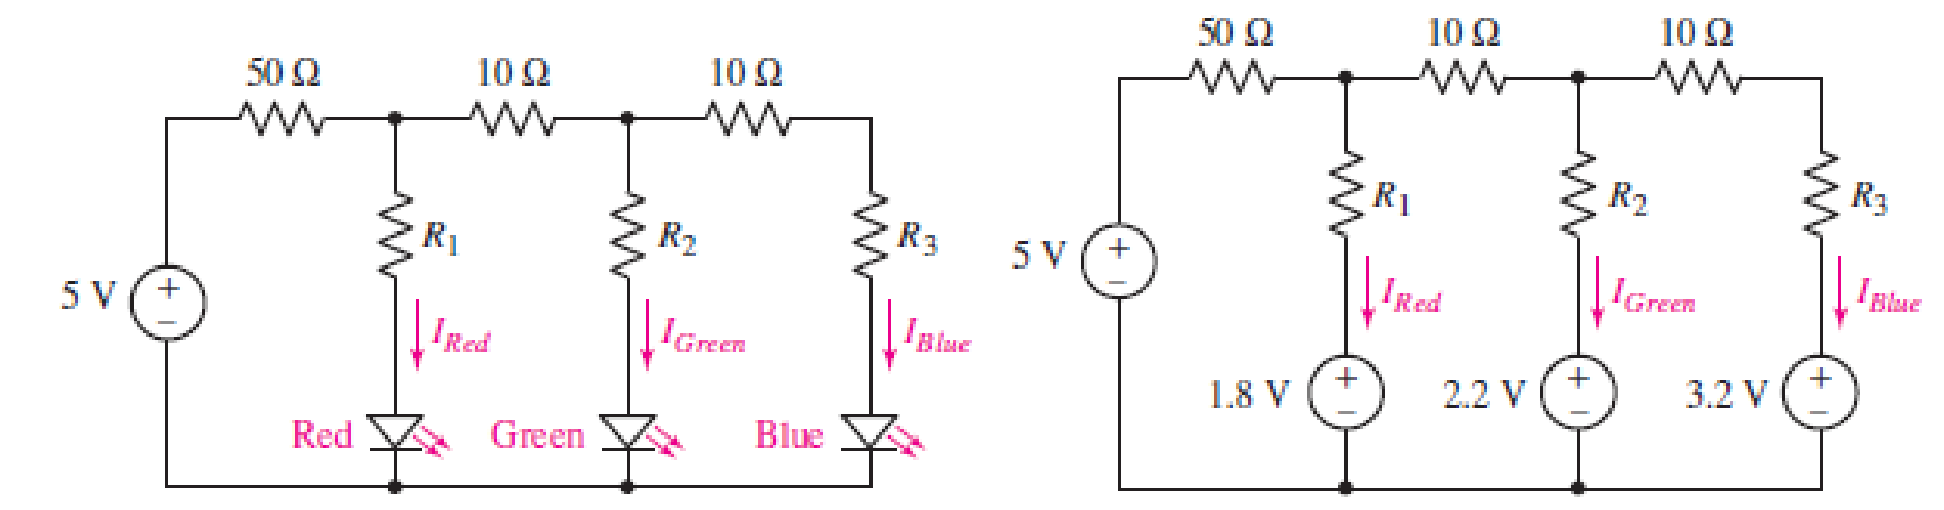 Chapter 4, Problem 73E, The LED circuit in Fig. 4.89 is used to mix colors to achieve any desired color in the RGB color 